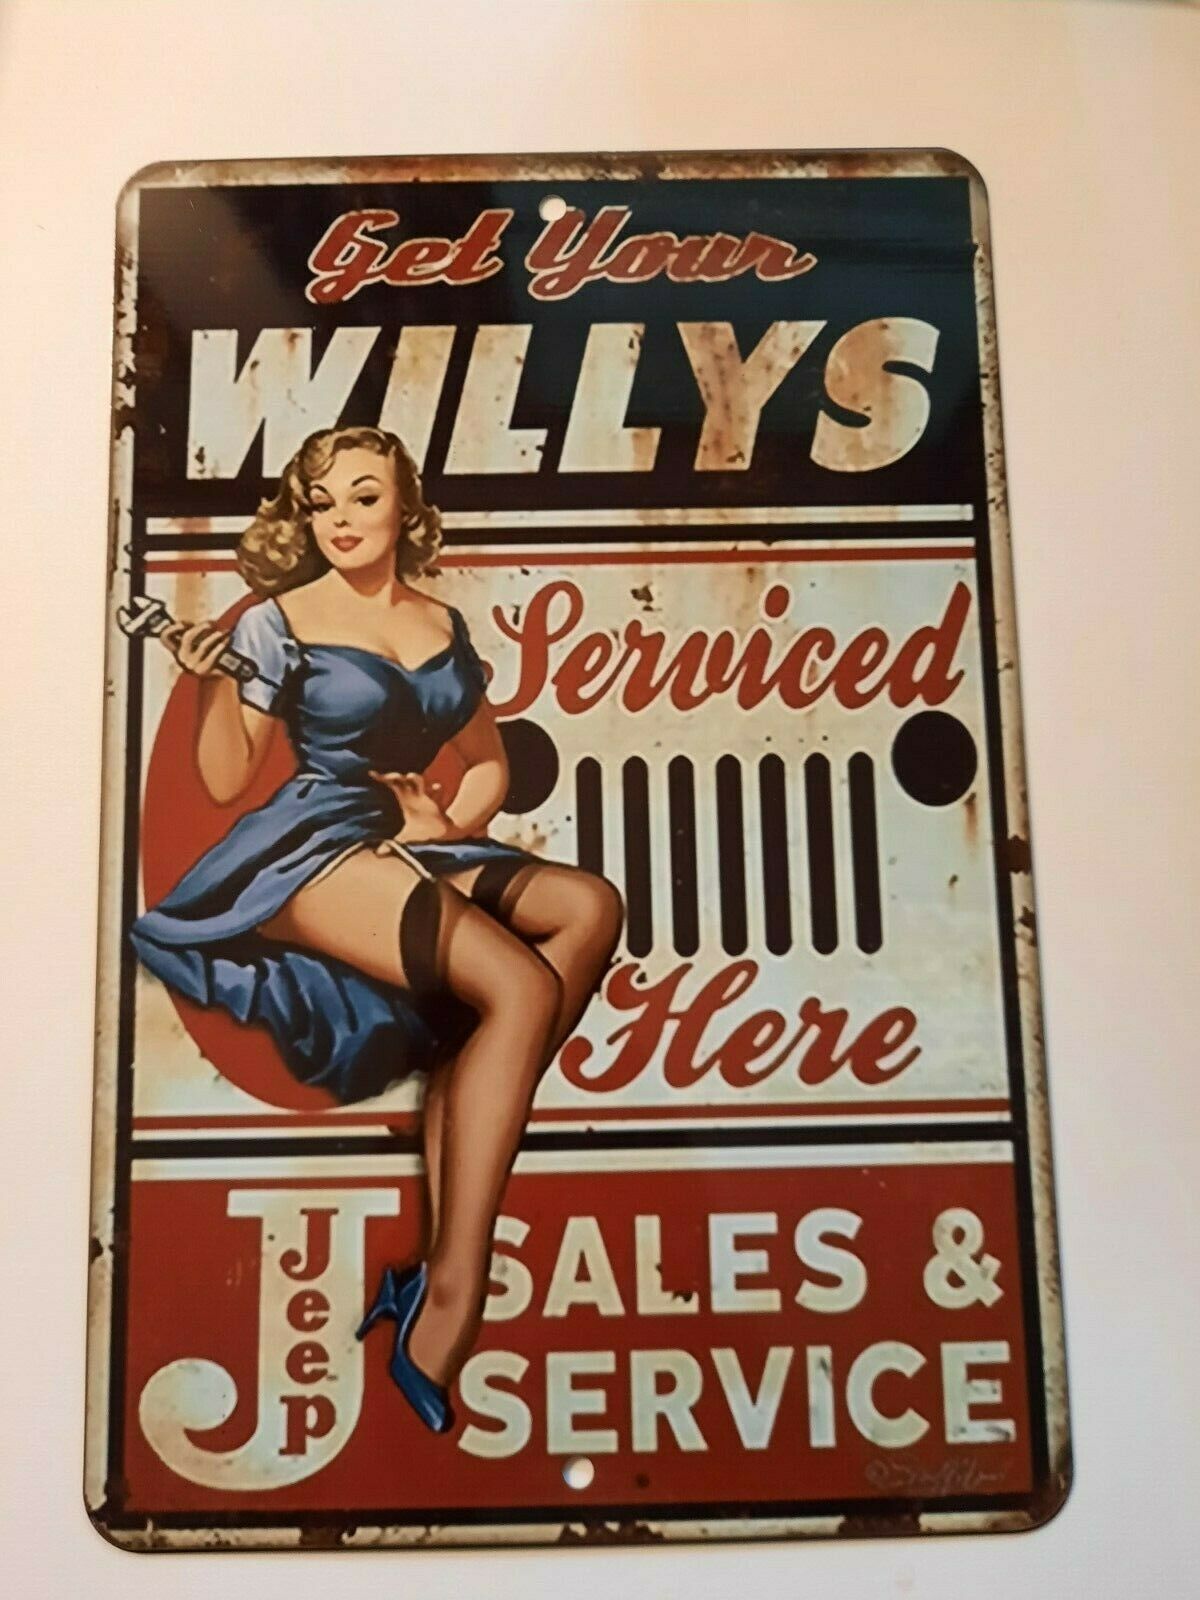 Get Your Willys Serviced Here 8x12 Metal Wall Sign Garage Poster Funny